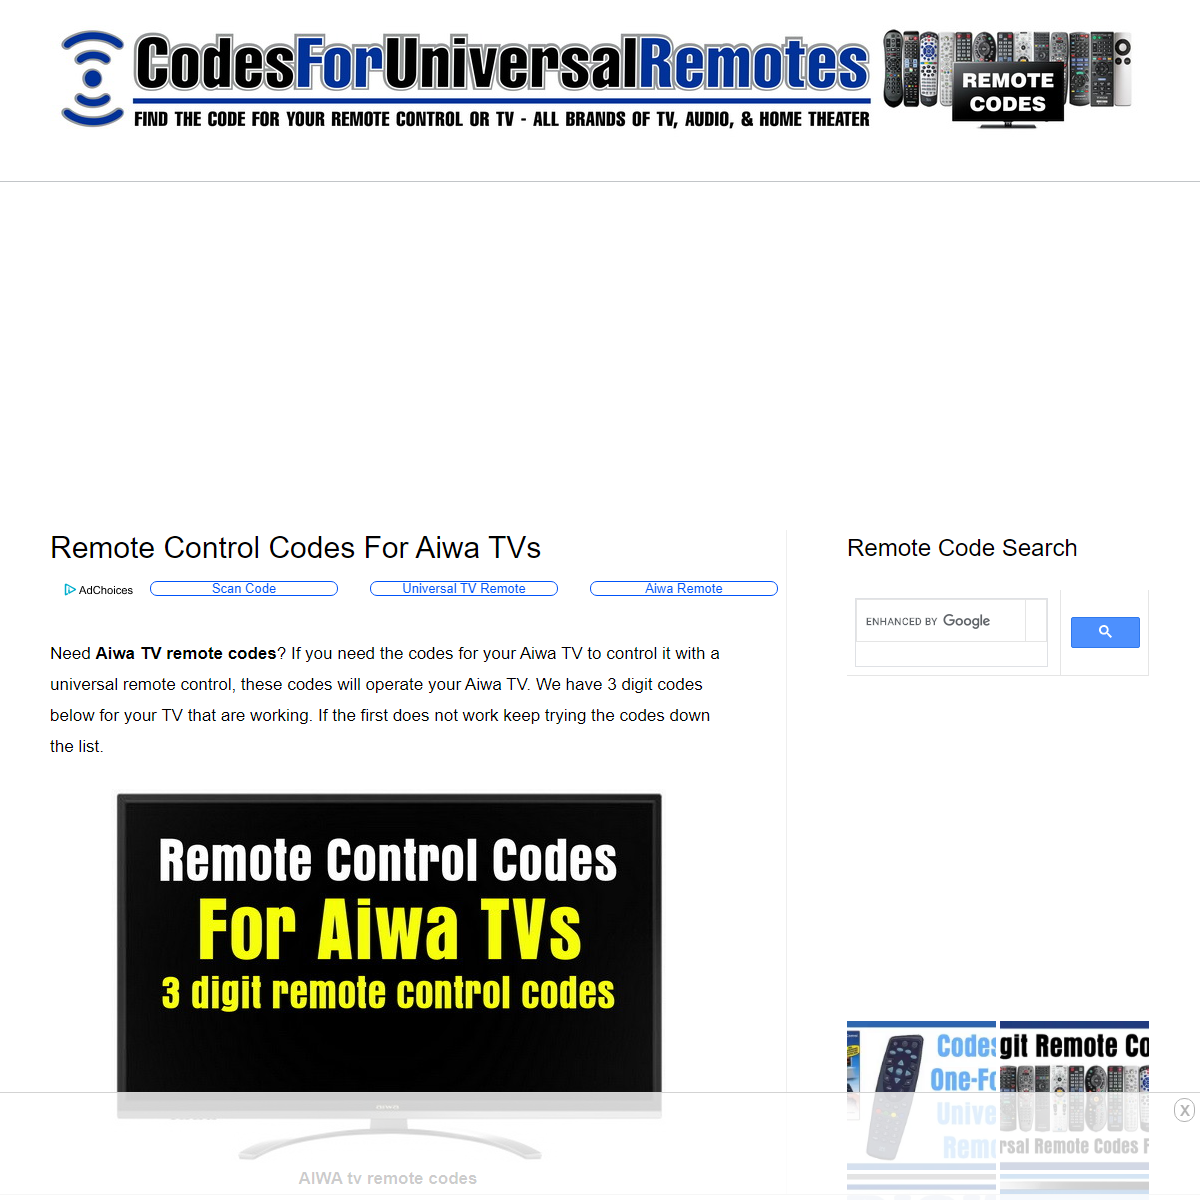 A complete backup of https://codesforuniversalremotes.com/remote-control-codes-for-aiwa-tvs/